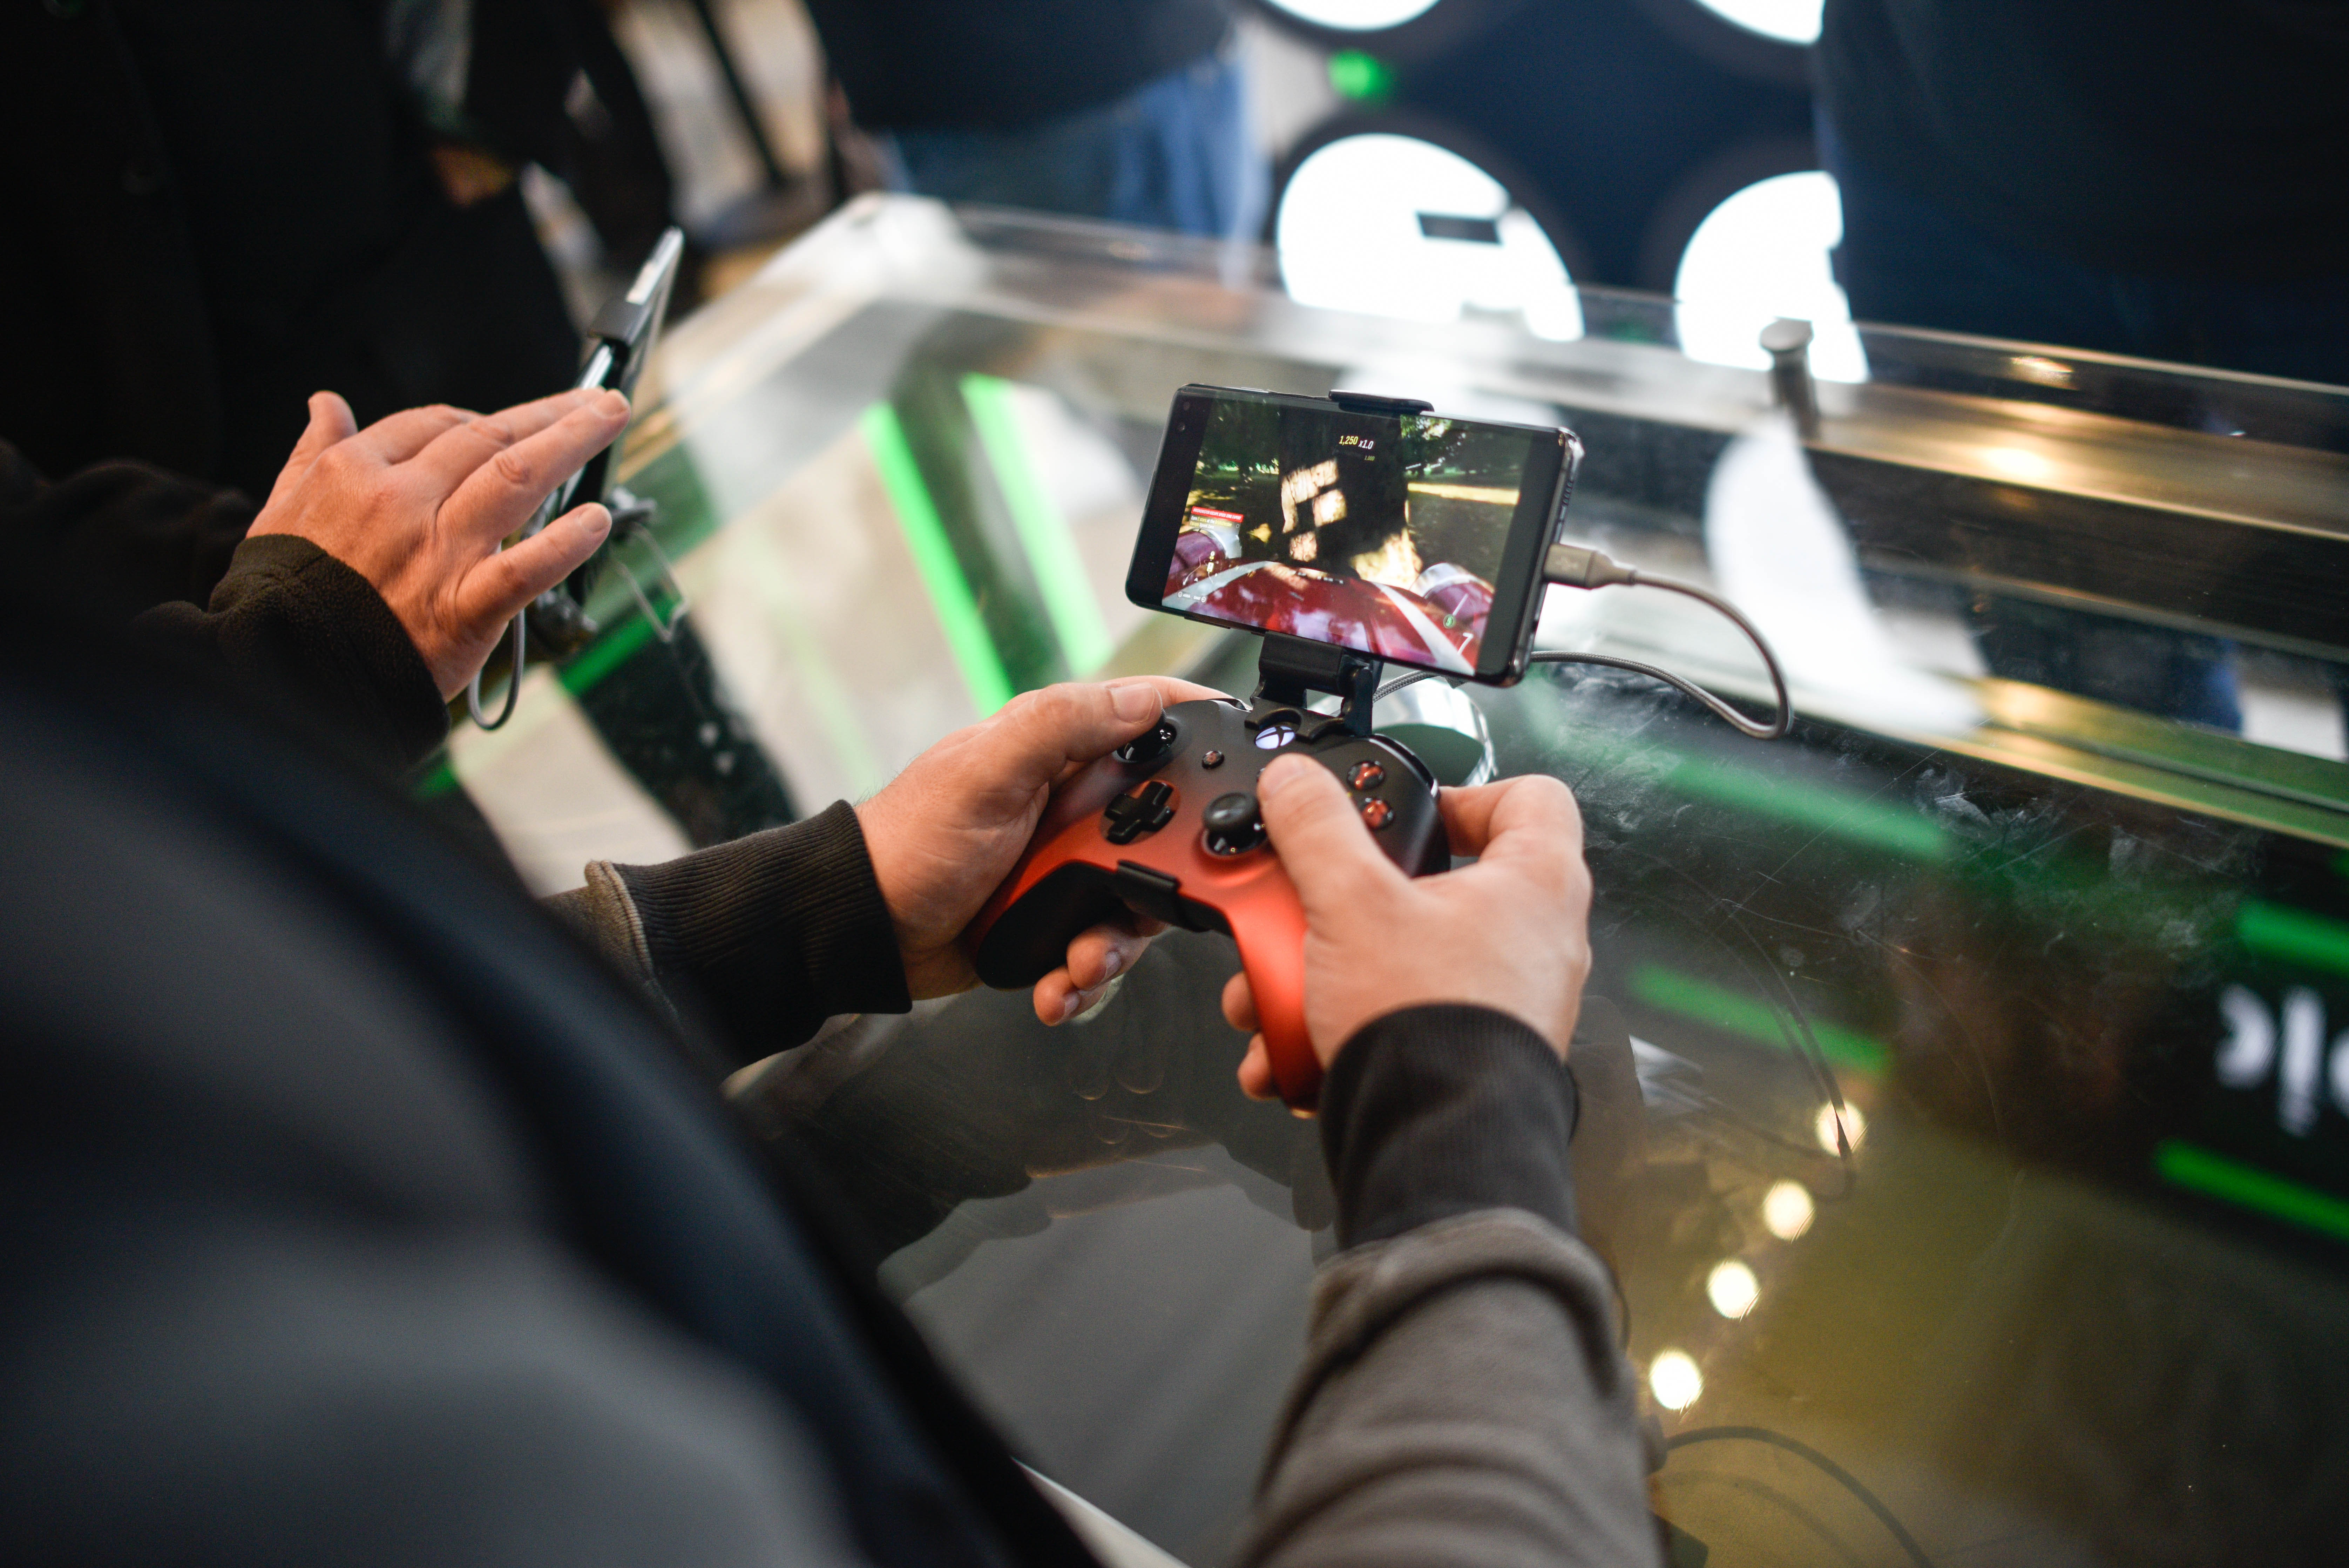 a customer plays Xbox One games on a mobile device at the xCloud display in the London Microsoft Store.